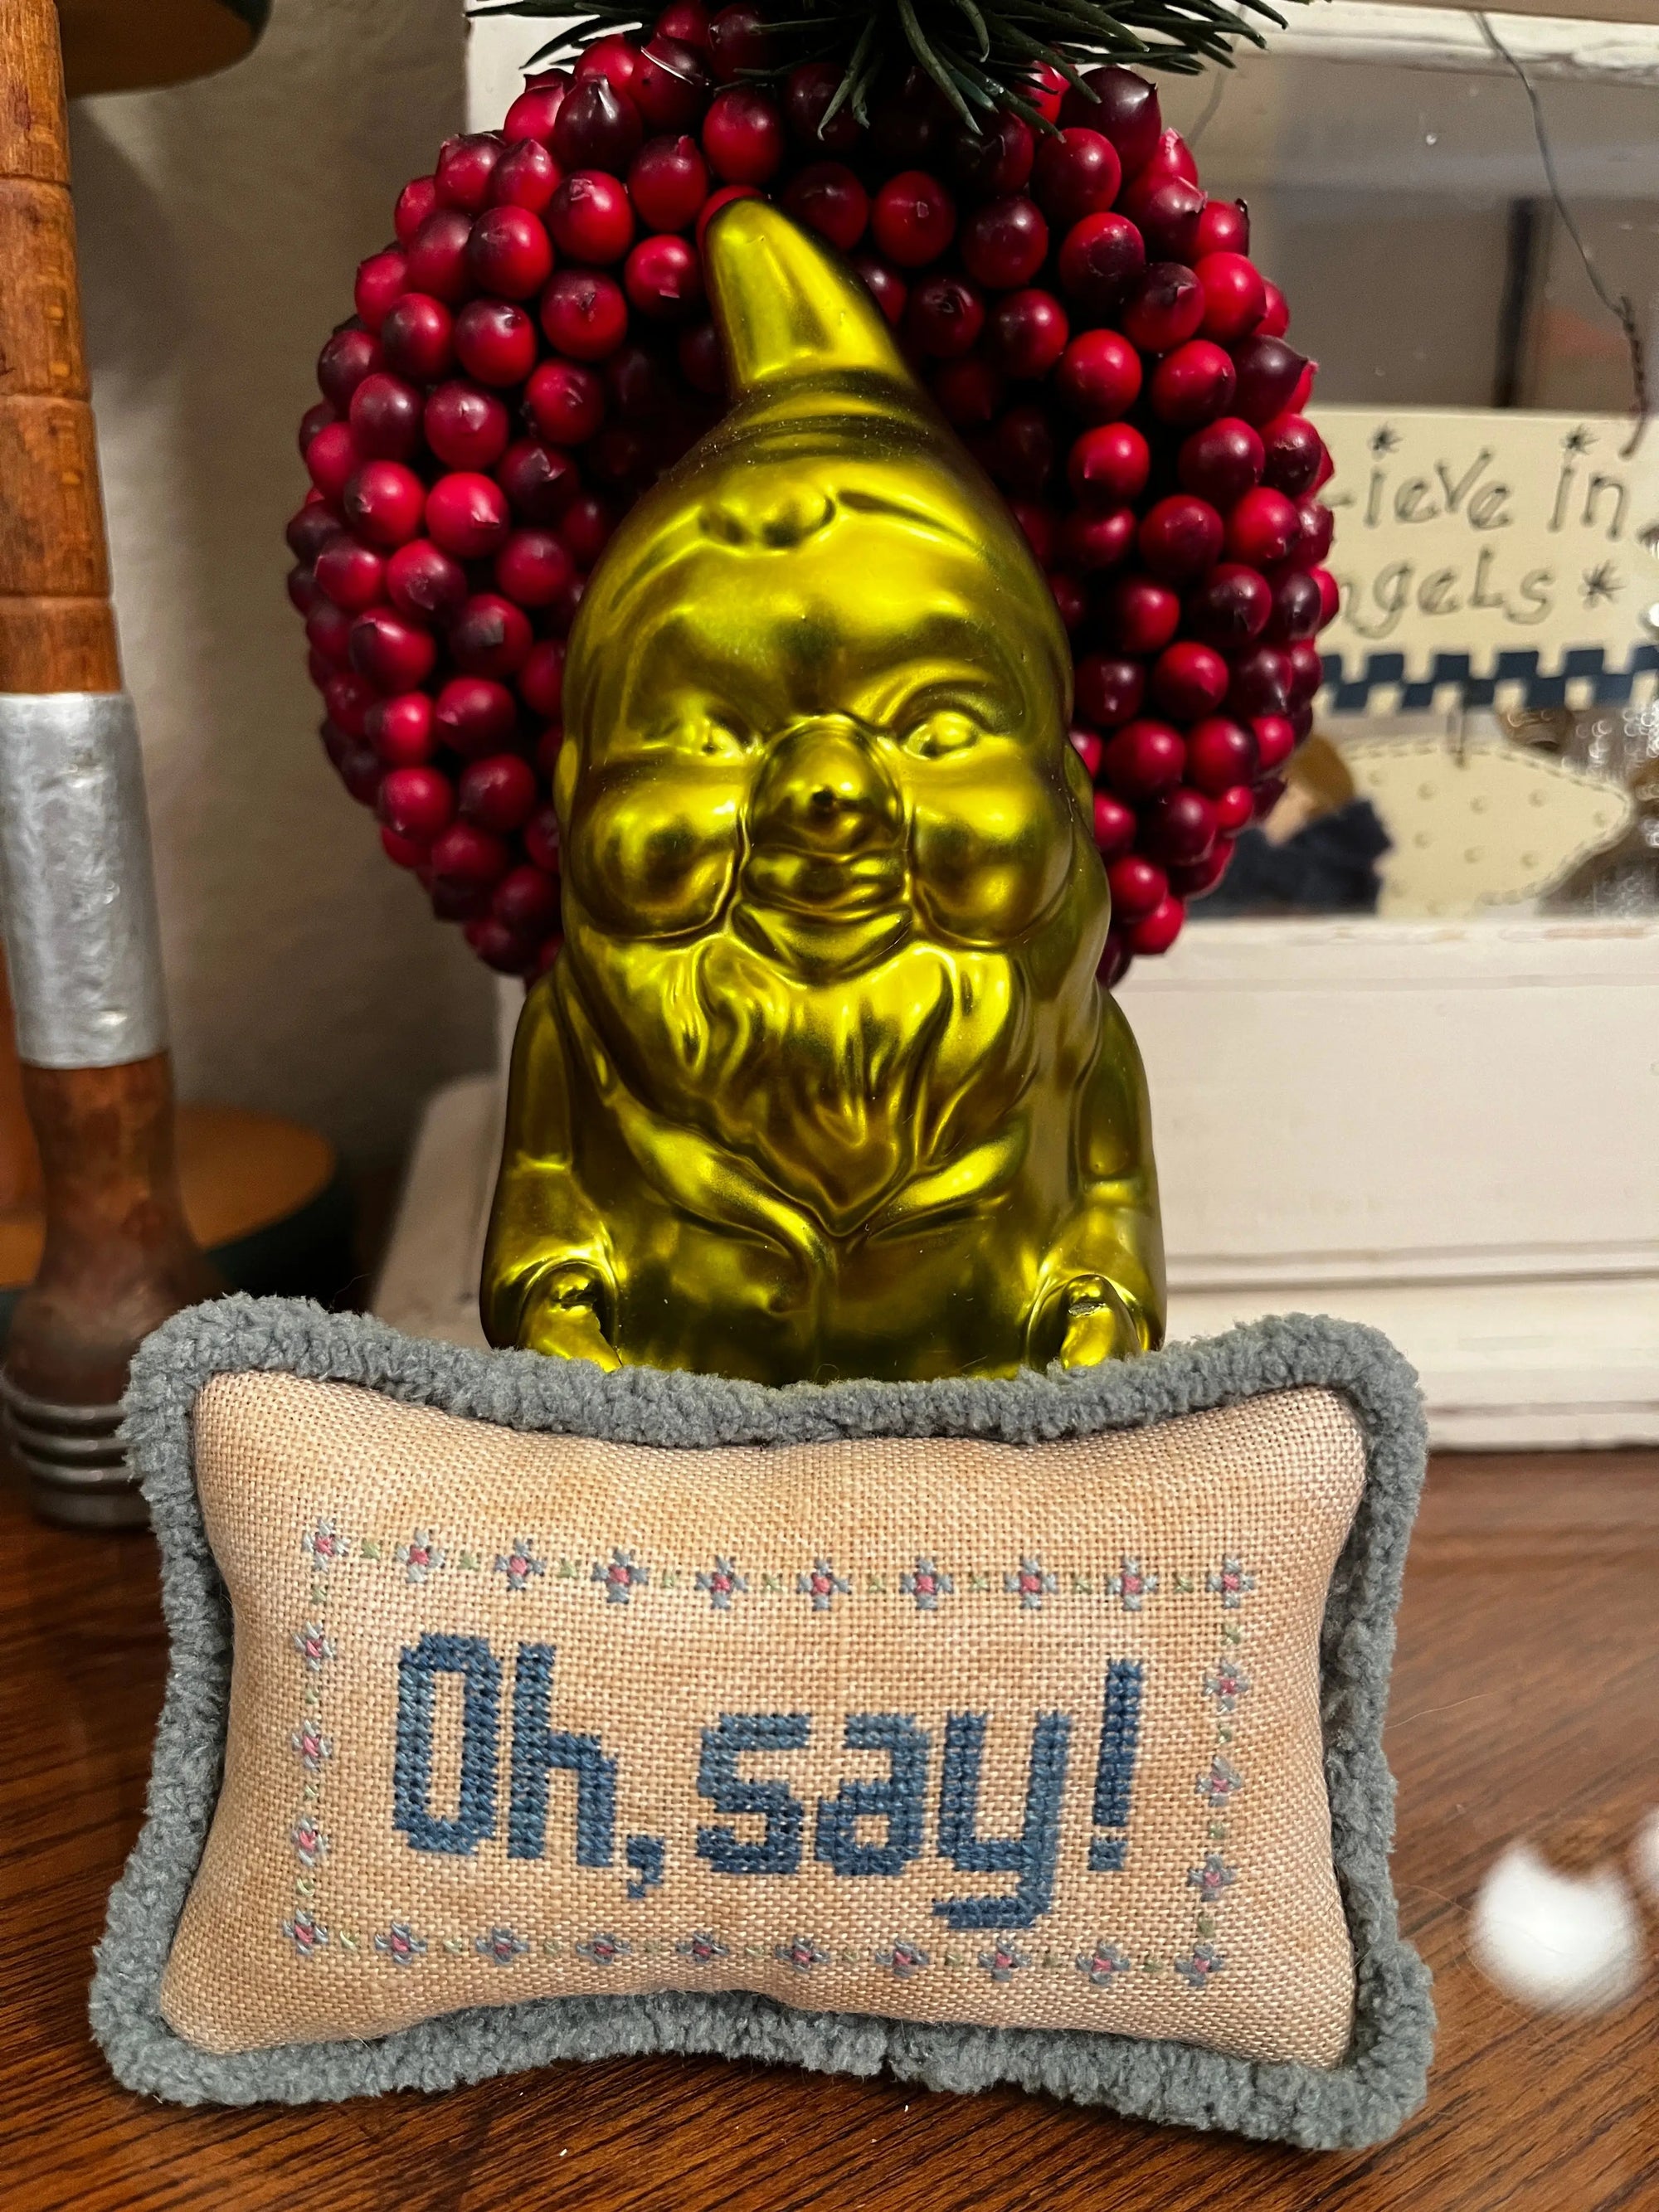 Oh, Say! (for Laura's Grandma) by Colorado Cross Stitcher Colorado Cross Stitcher